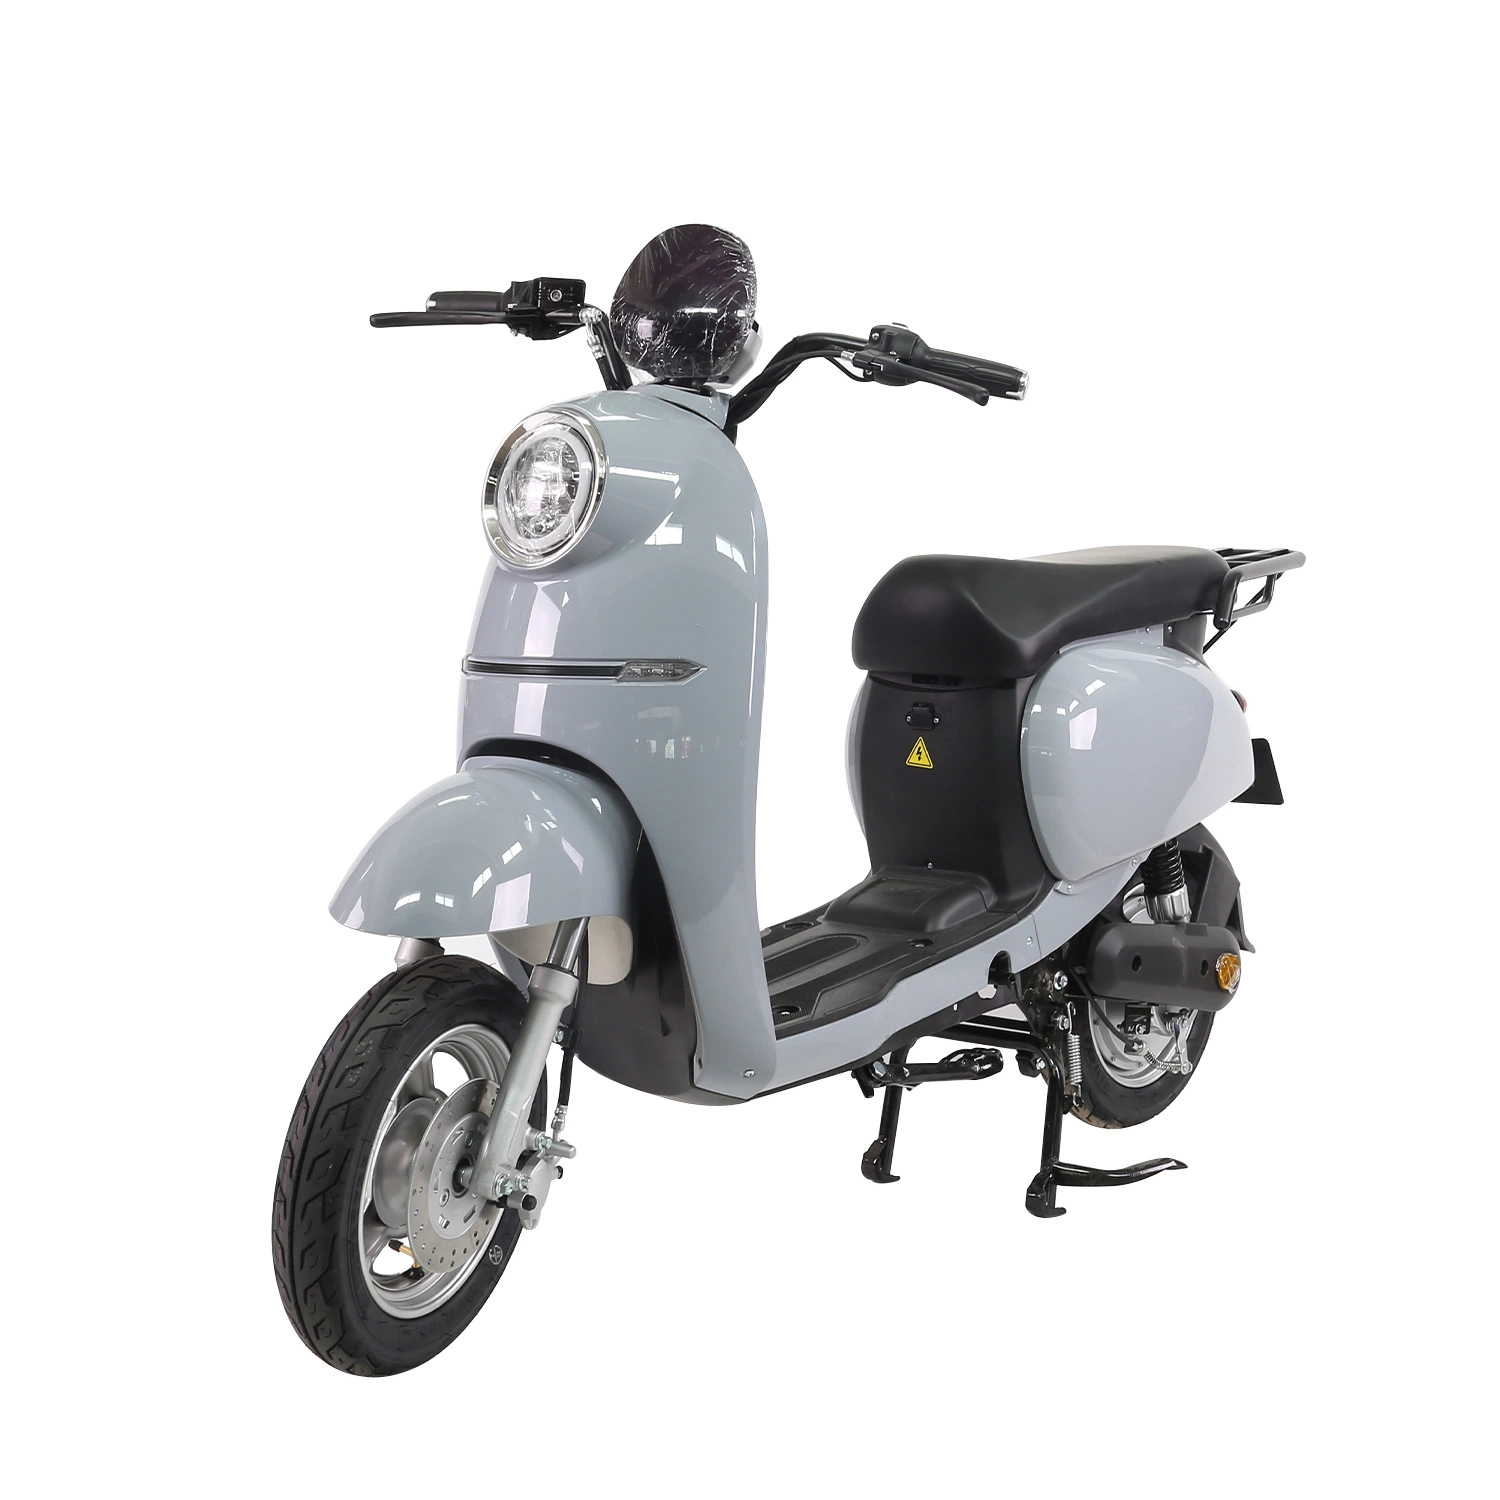 1500W Max Speed 50km/H and Max Range 90km Vespa Two Sets of 70V35ah Low-Carbon Electric Motorcycle Control System LED Light Vehicle Small Men